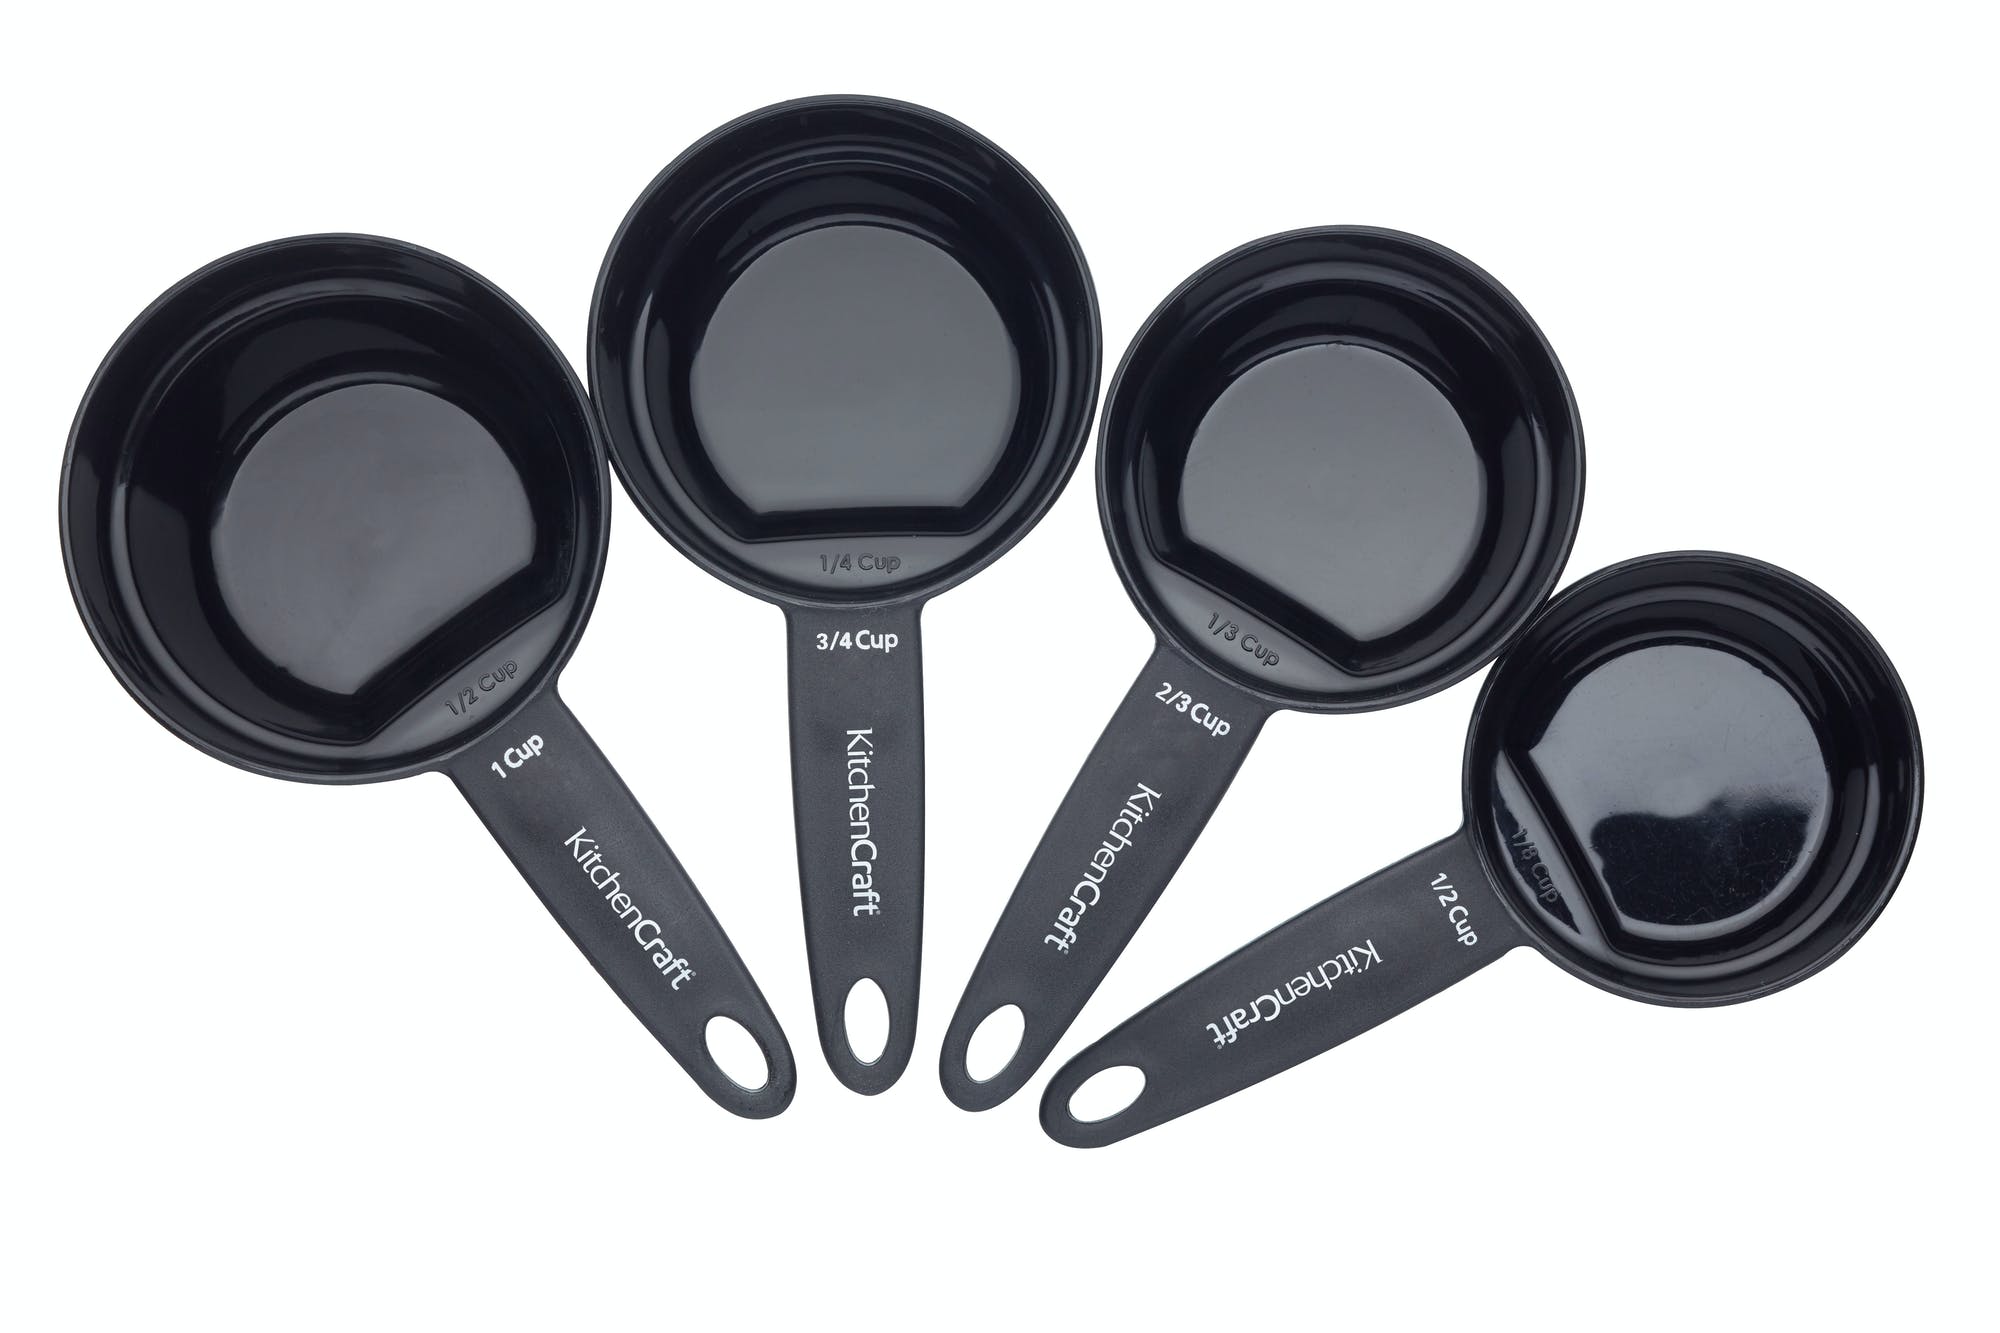 KitchenCraft Easy Store Magnetic Measuring Cups - The Cooks Cupboard Ltd